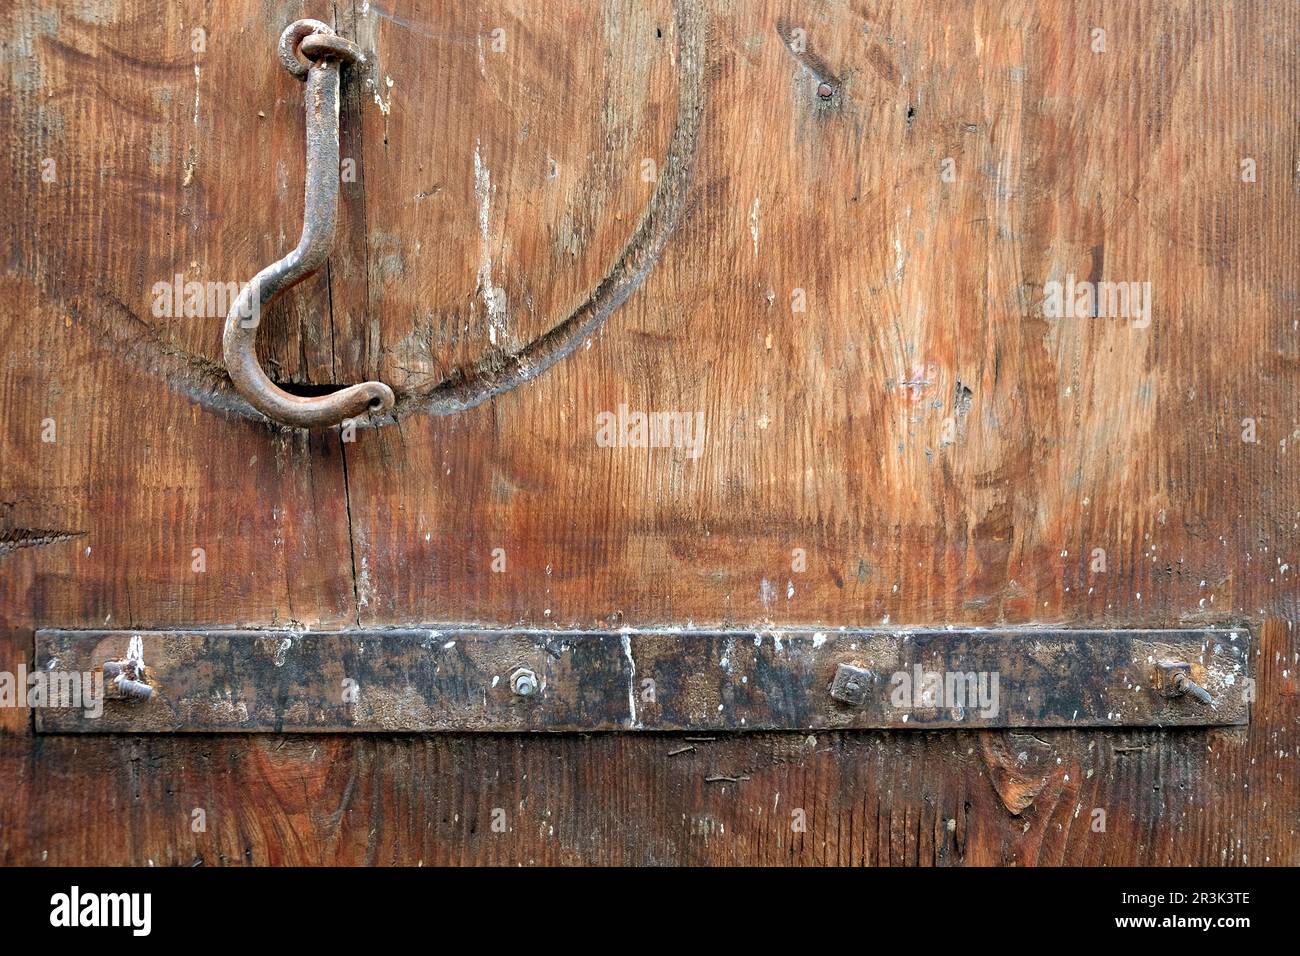 Fragment of an old wooden gate painted brown with a rusty metal plank and a locking hook close up view Stock Photo